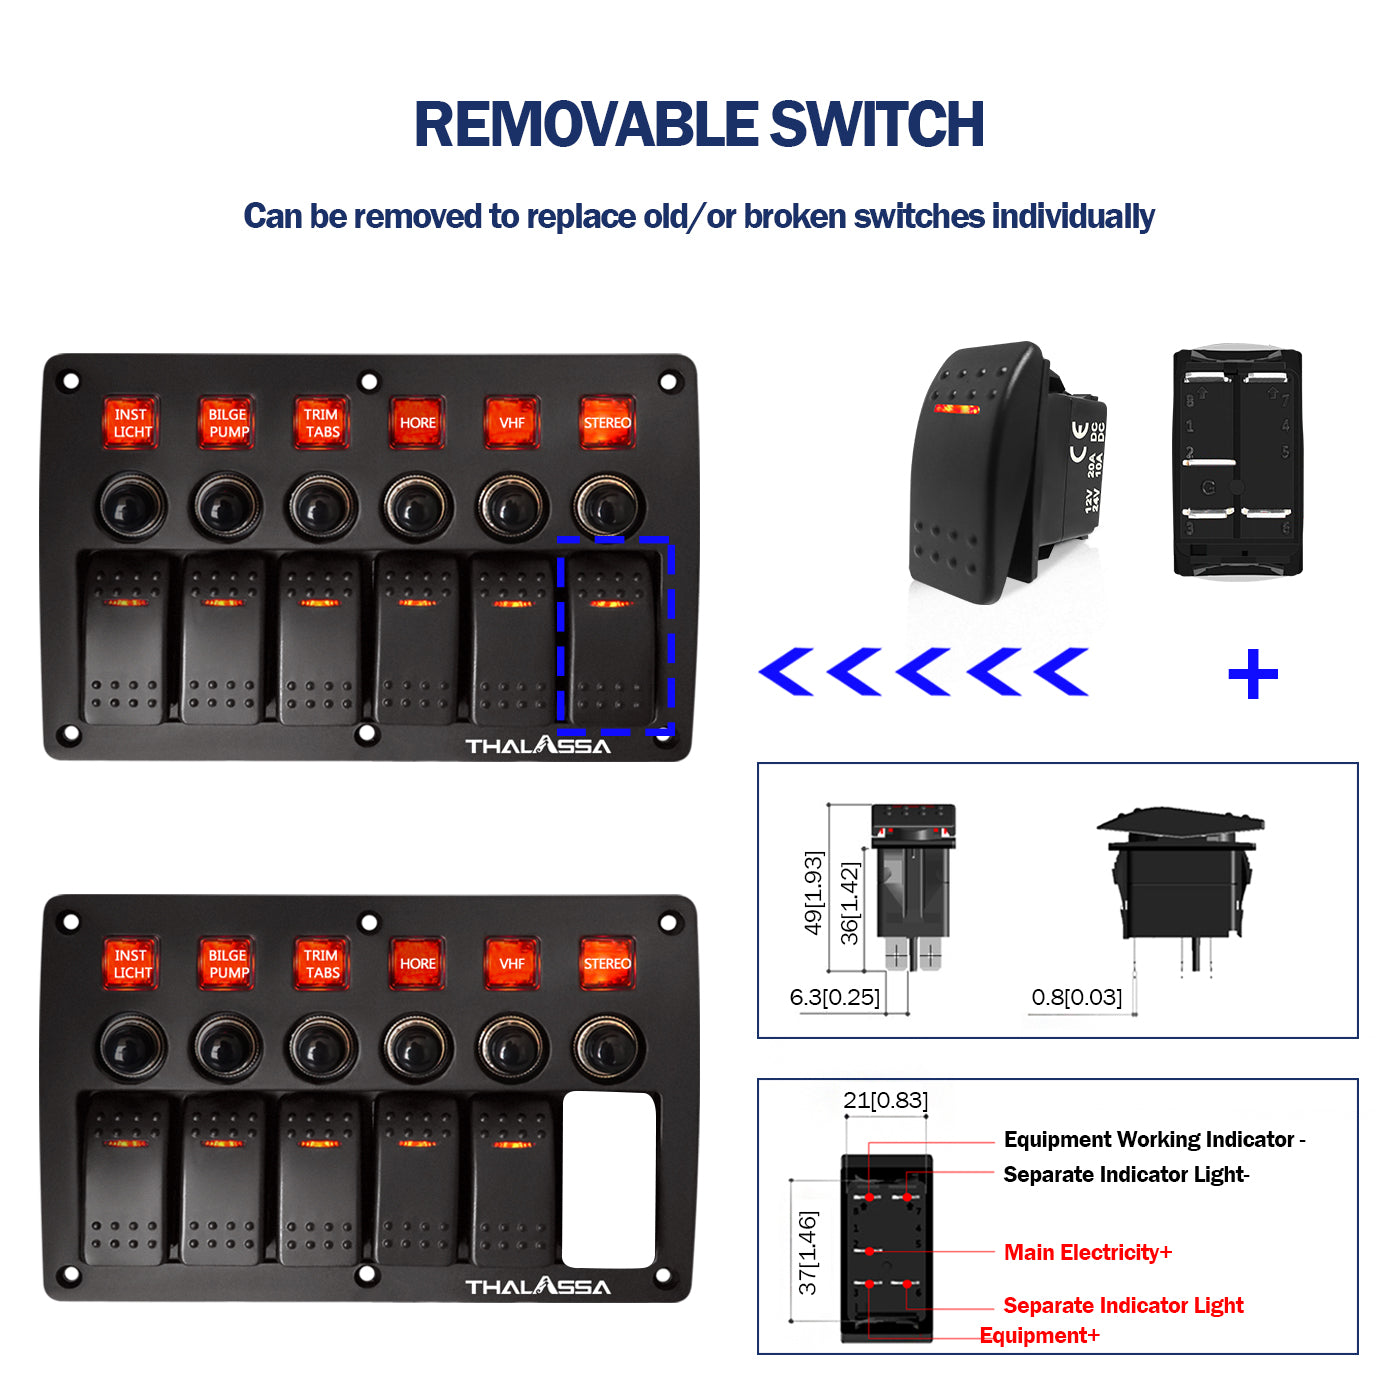 GenuineMarine-THALASSA 4/8 Gang Pre Wired Rocker Switch Panel - Waterproof On/Off Toggle Rocker, 12V 24V with Fuse, Circuit Breaker with 3 Pin Red LED Indicator for RV, Cars, Marine, Boat - THALASSA